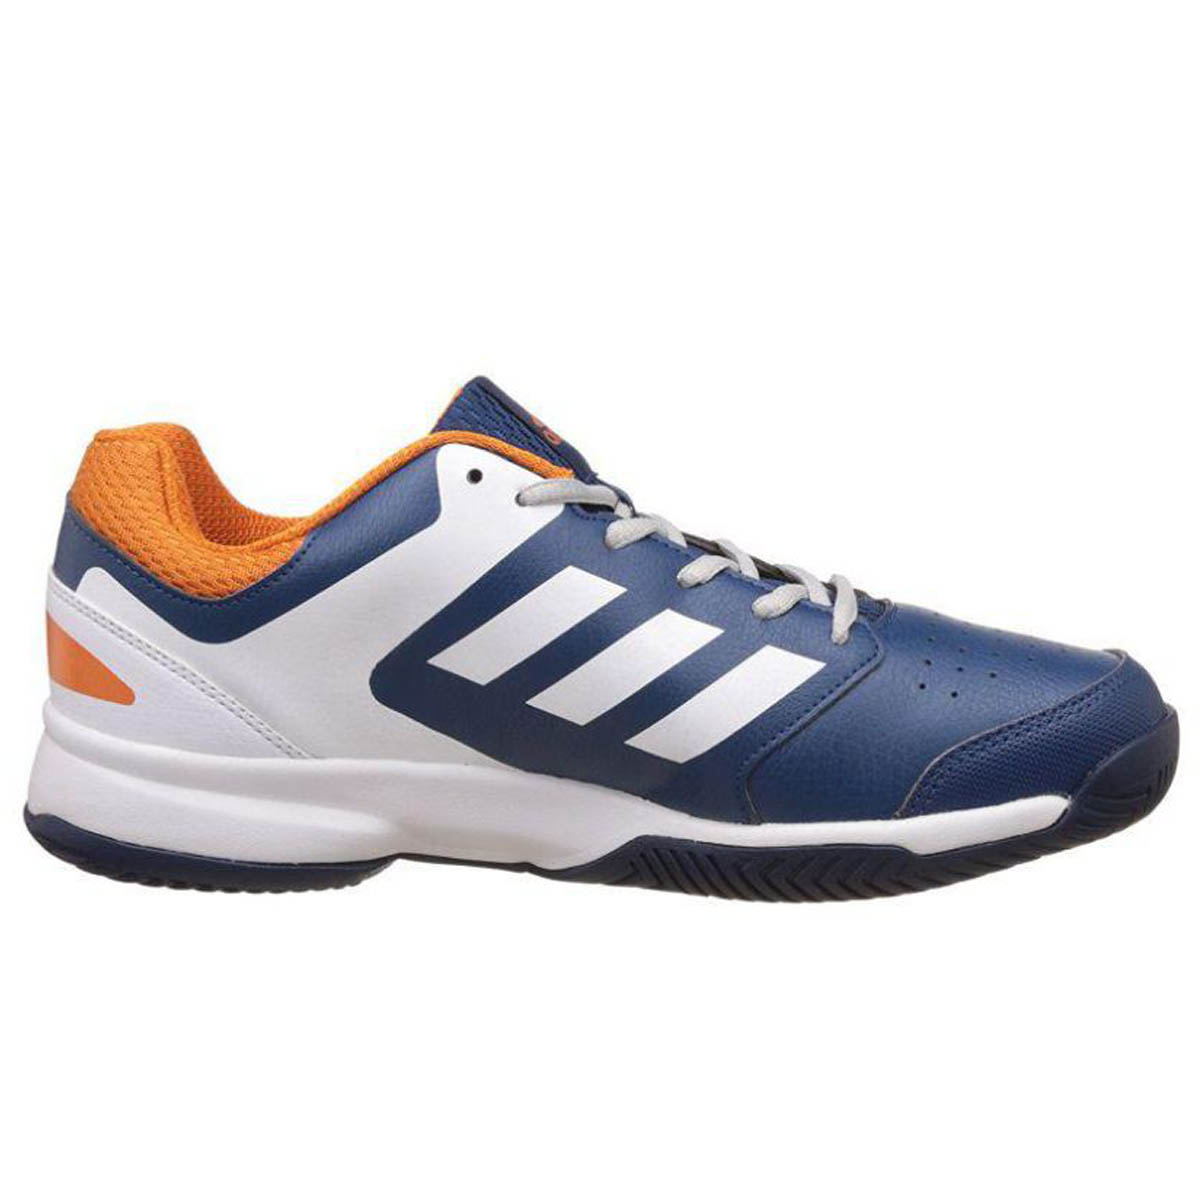 Adidas Tennis Shoes Online Store, 55% OFF 